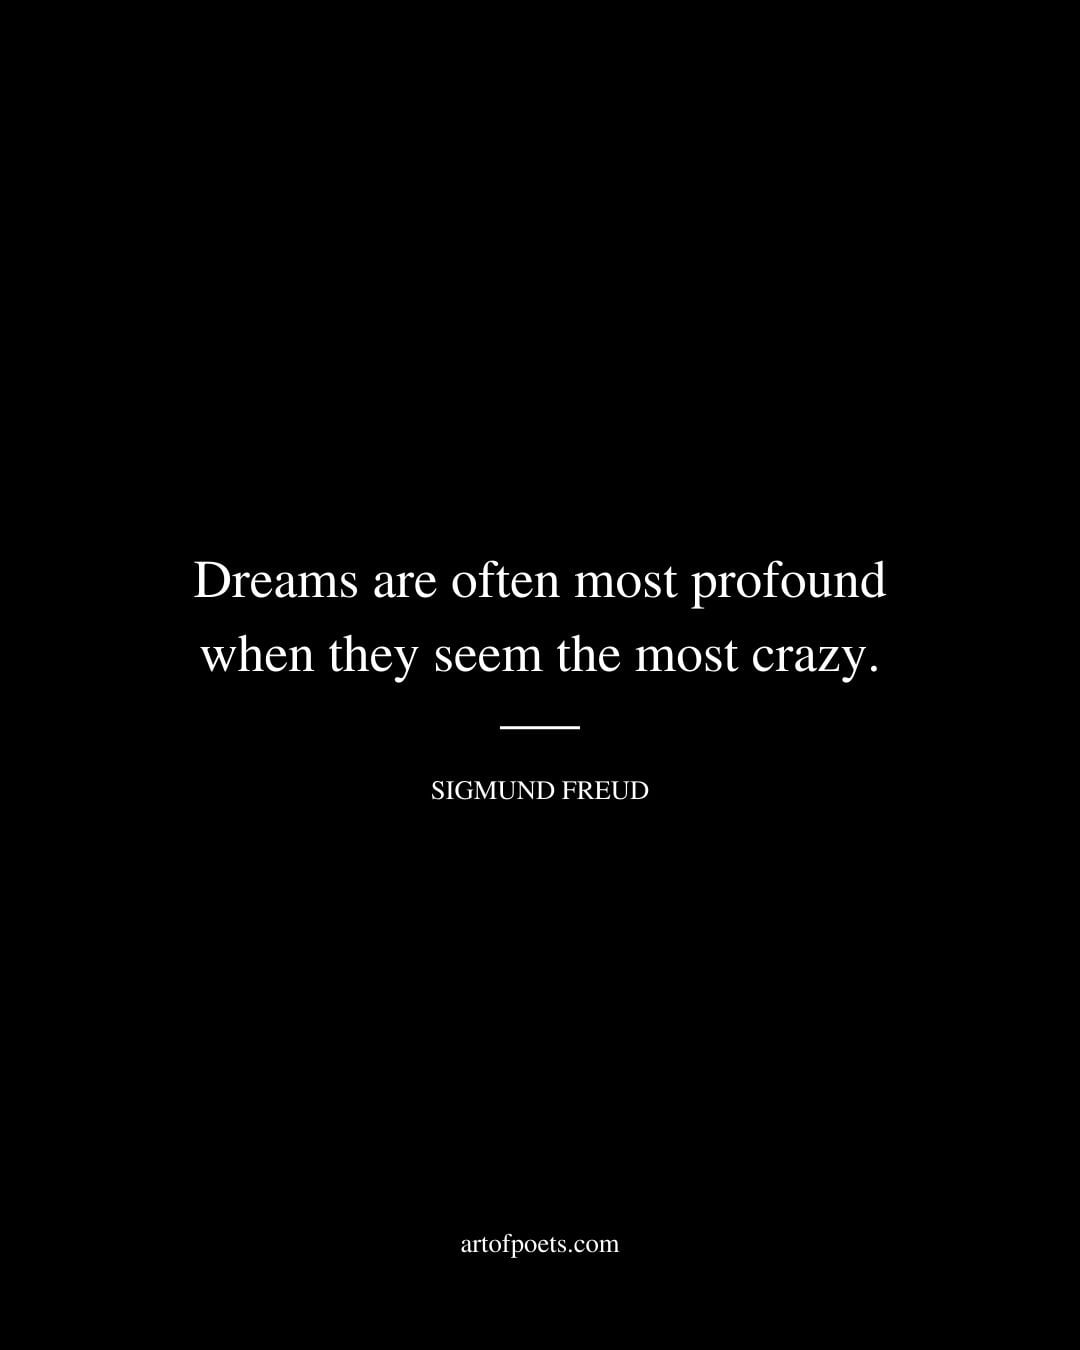 Dreams are often most profound when they seem the most crazy